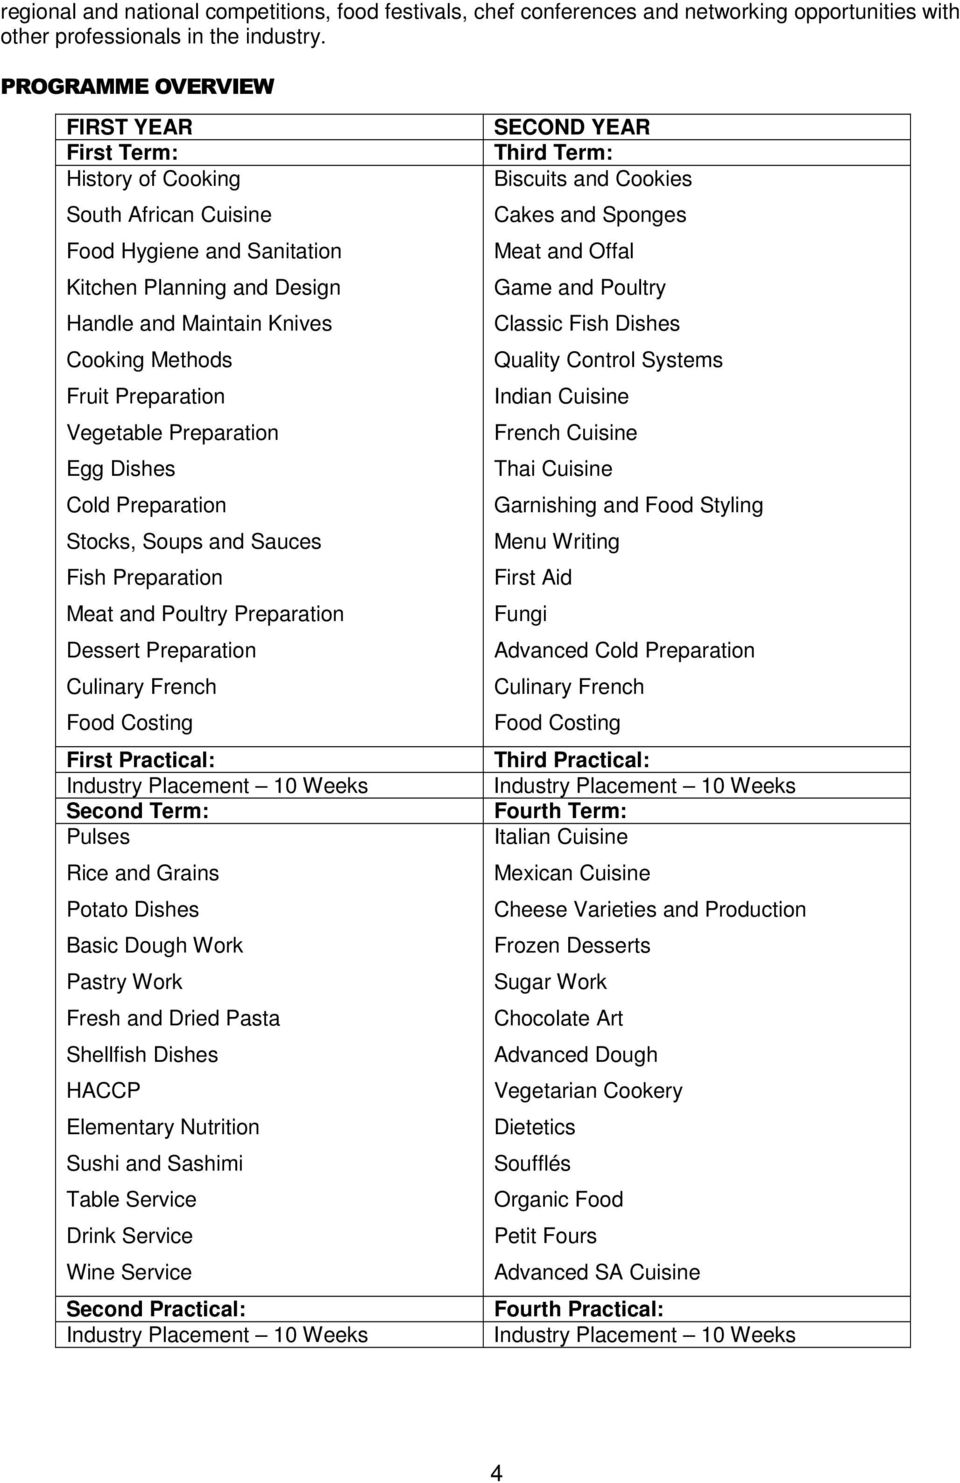 Vegetable Preparation Egg Dishes Cold Preparation Stocks, Soups and Sauces Fish Preparation Meat and Poultry Preparation Dessert Preparation Culinary French Food Costing First Practical: Second Term: